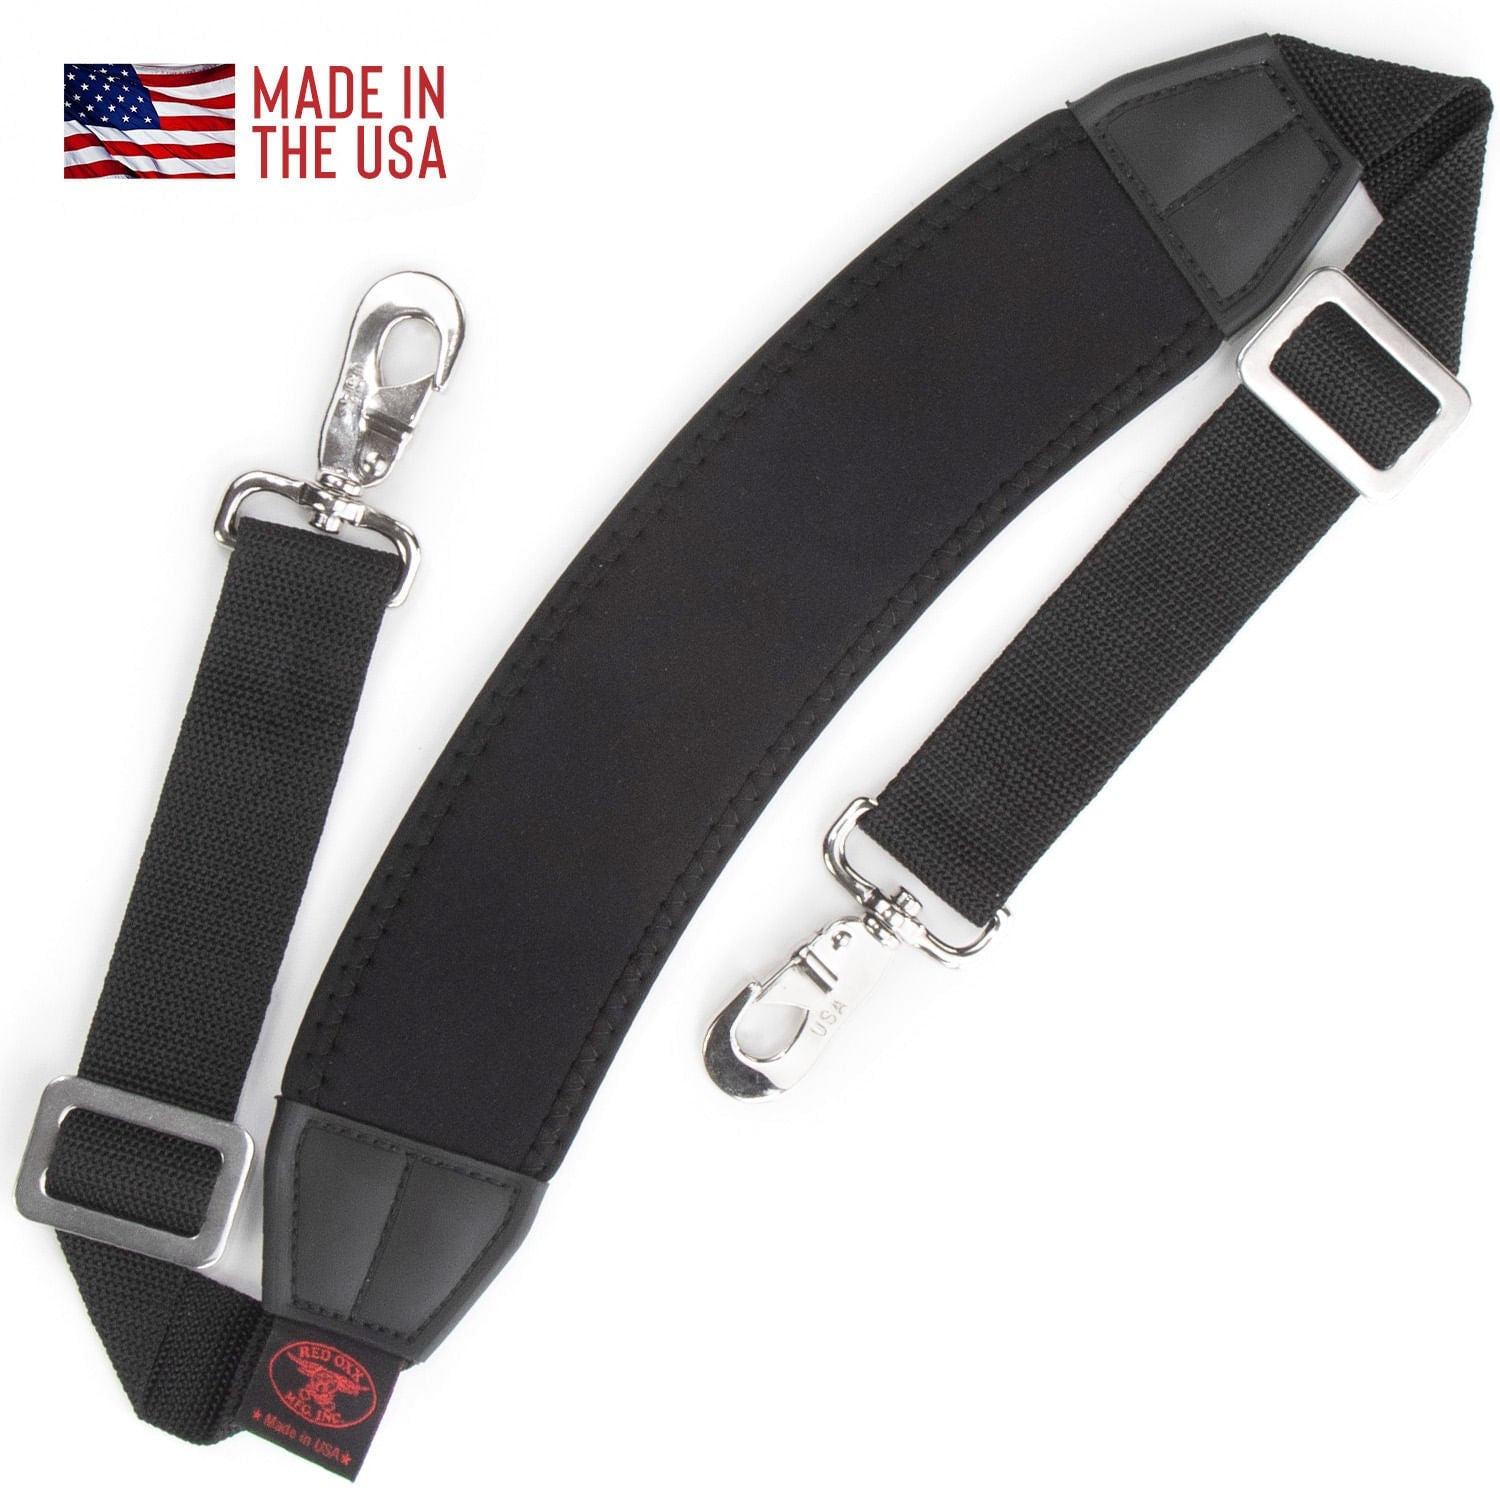 Long Hauler shoulder strap with metal hardware.  Three hundred and sixty degree swivel clip for attachment.  Wide comfortable neoprene should pad with ergonomic curve. 